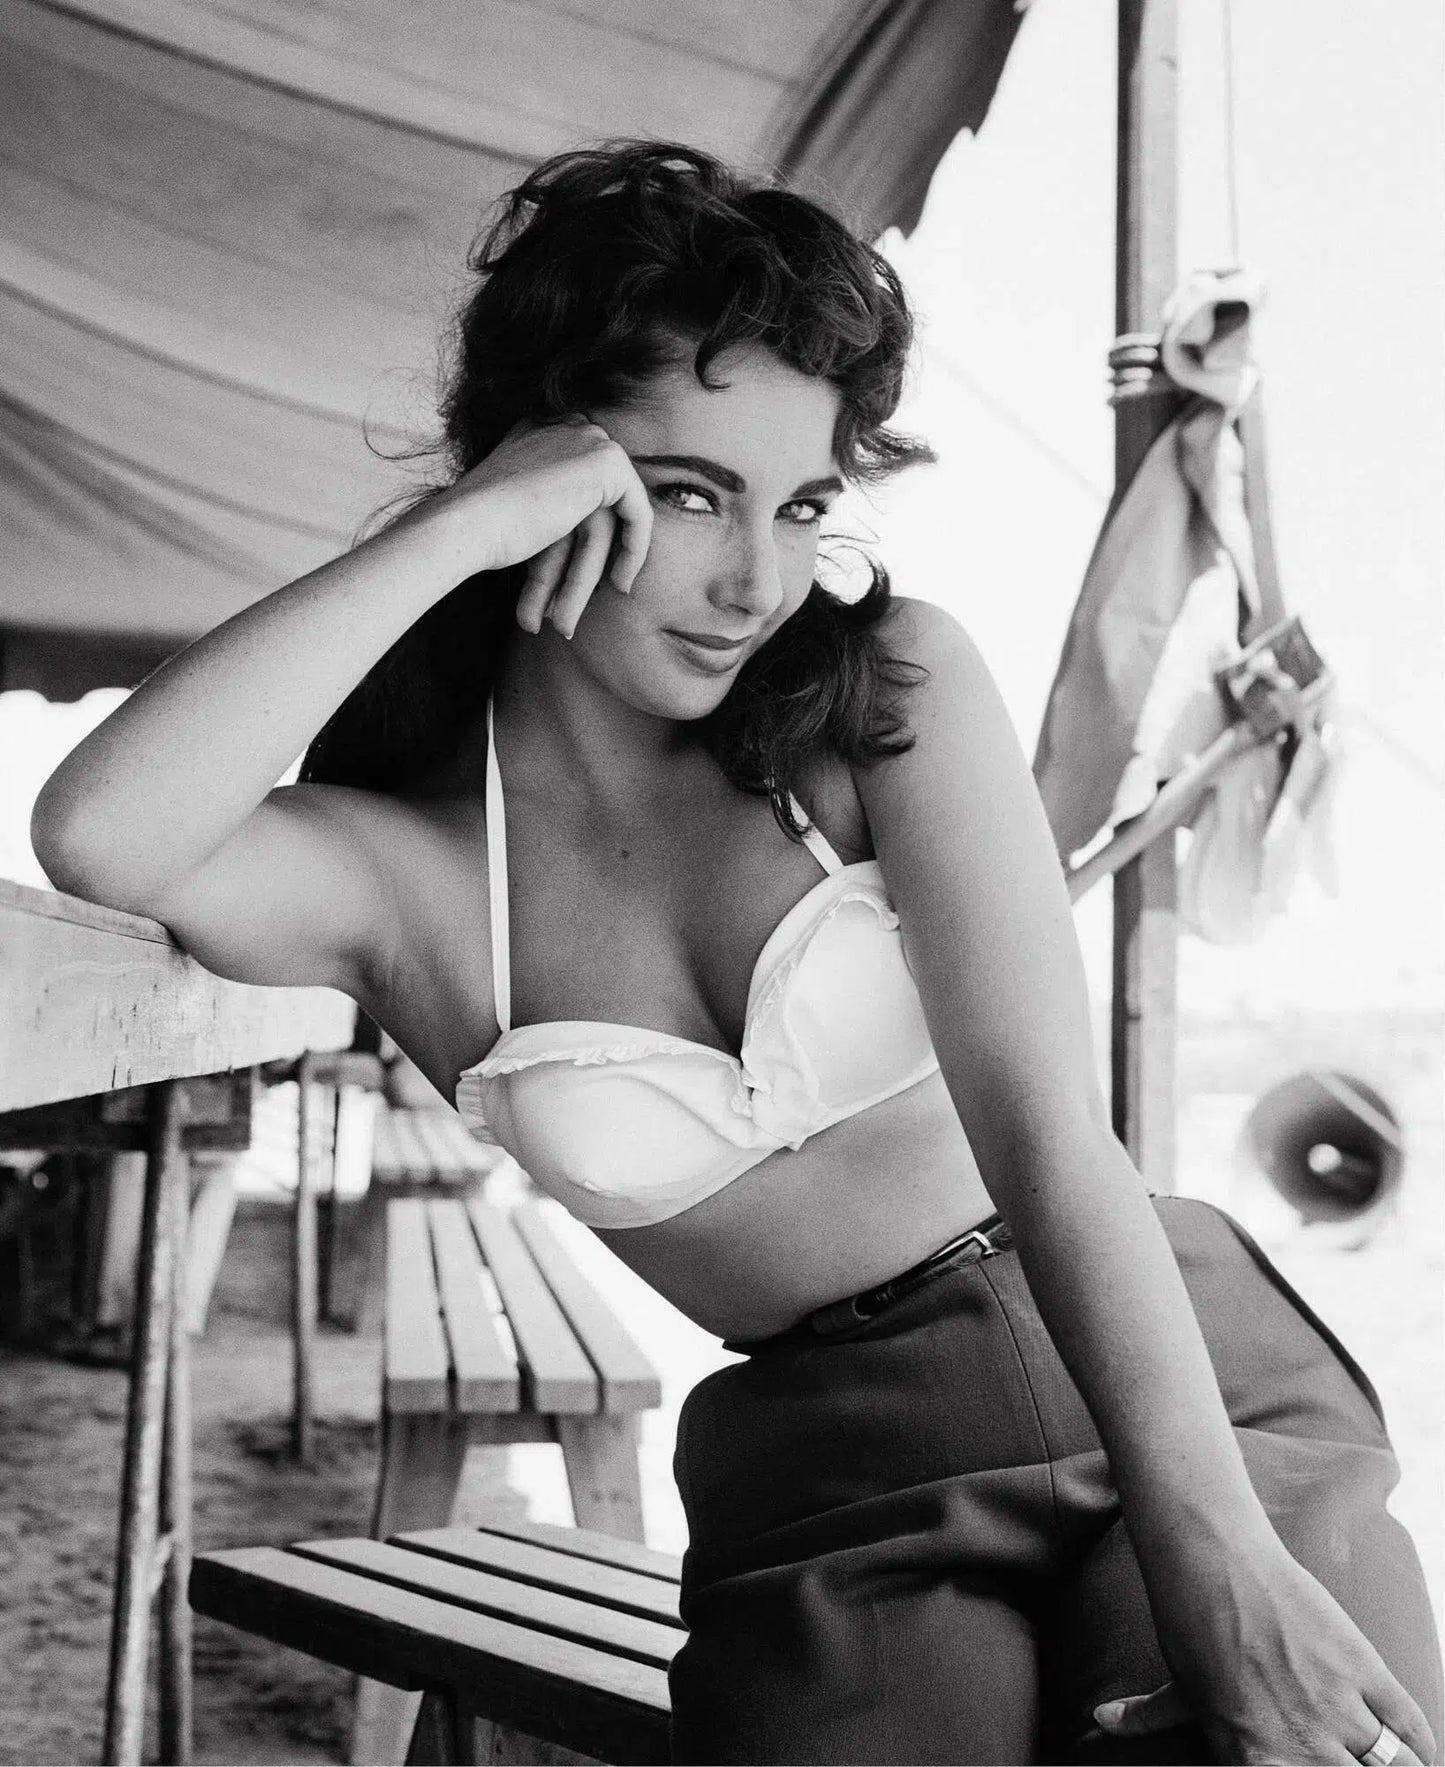 Elizabeth Taylor on the set of "Giant" (b&w), from The Wild Ones collection-PurePhoto